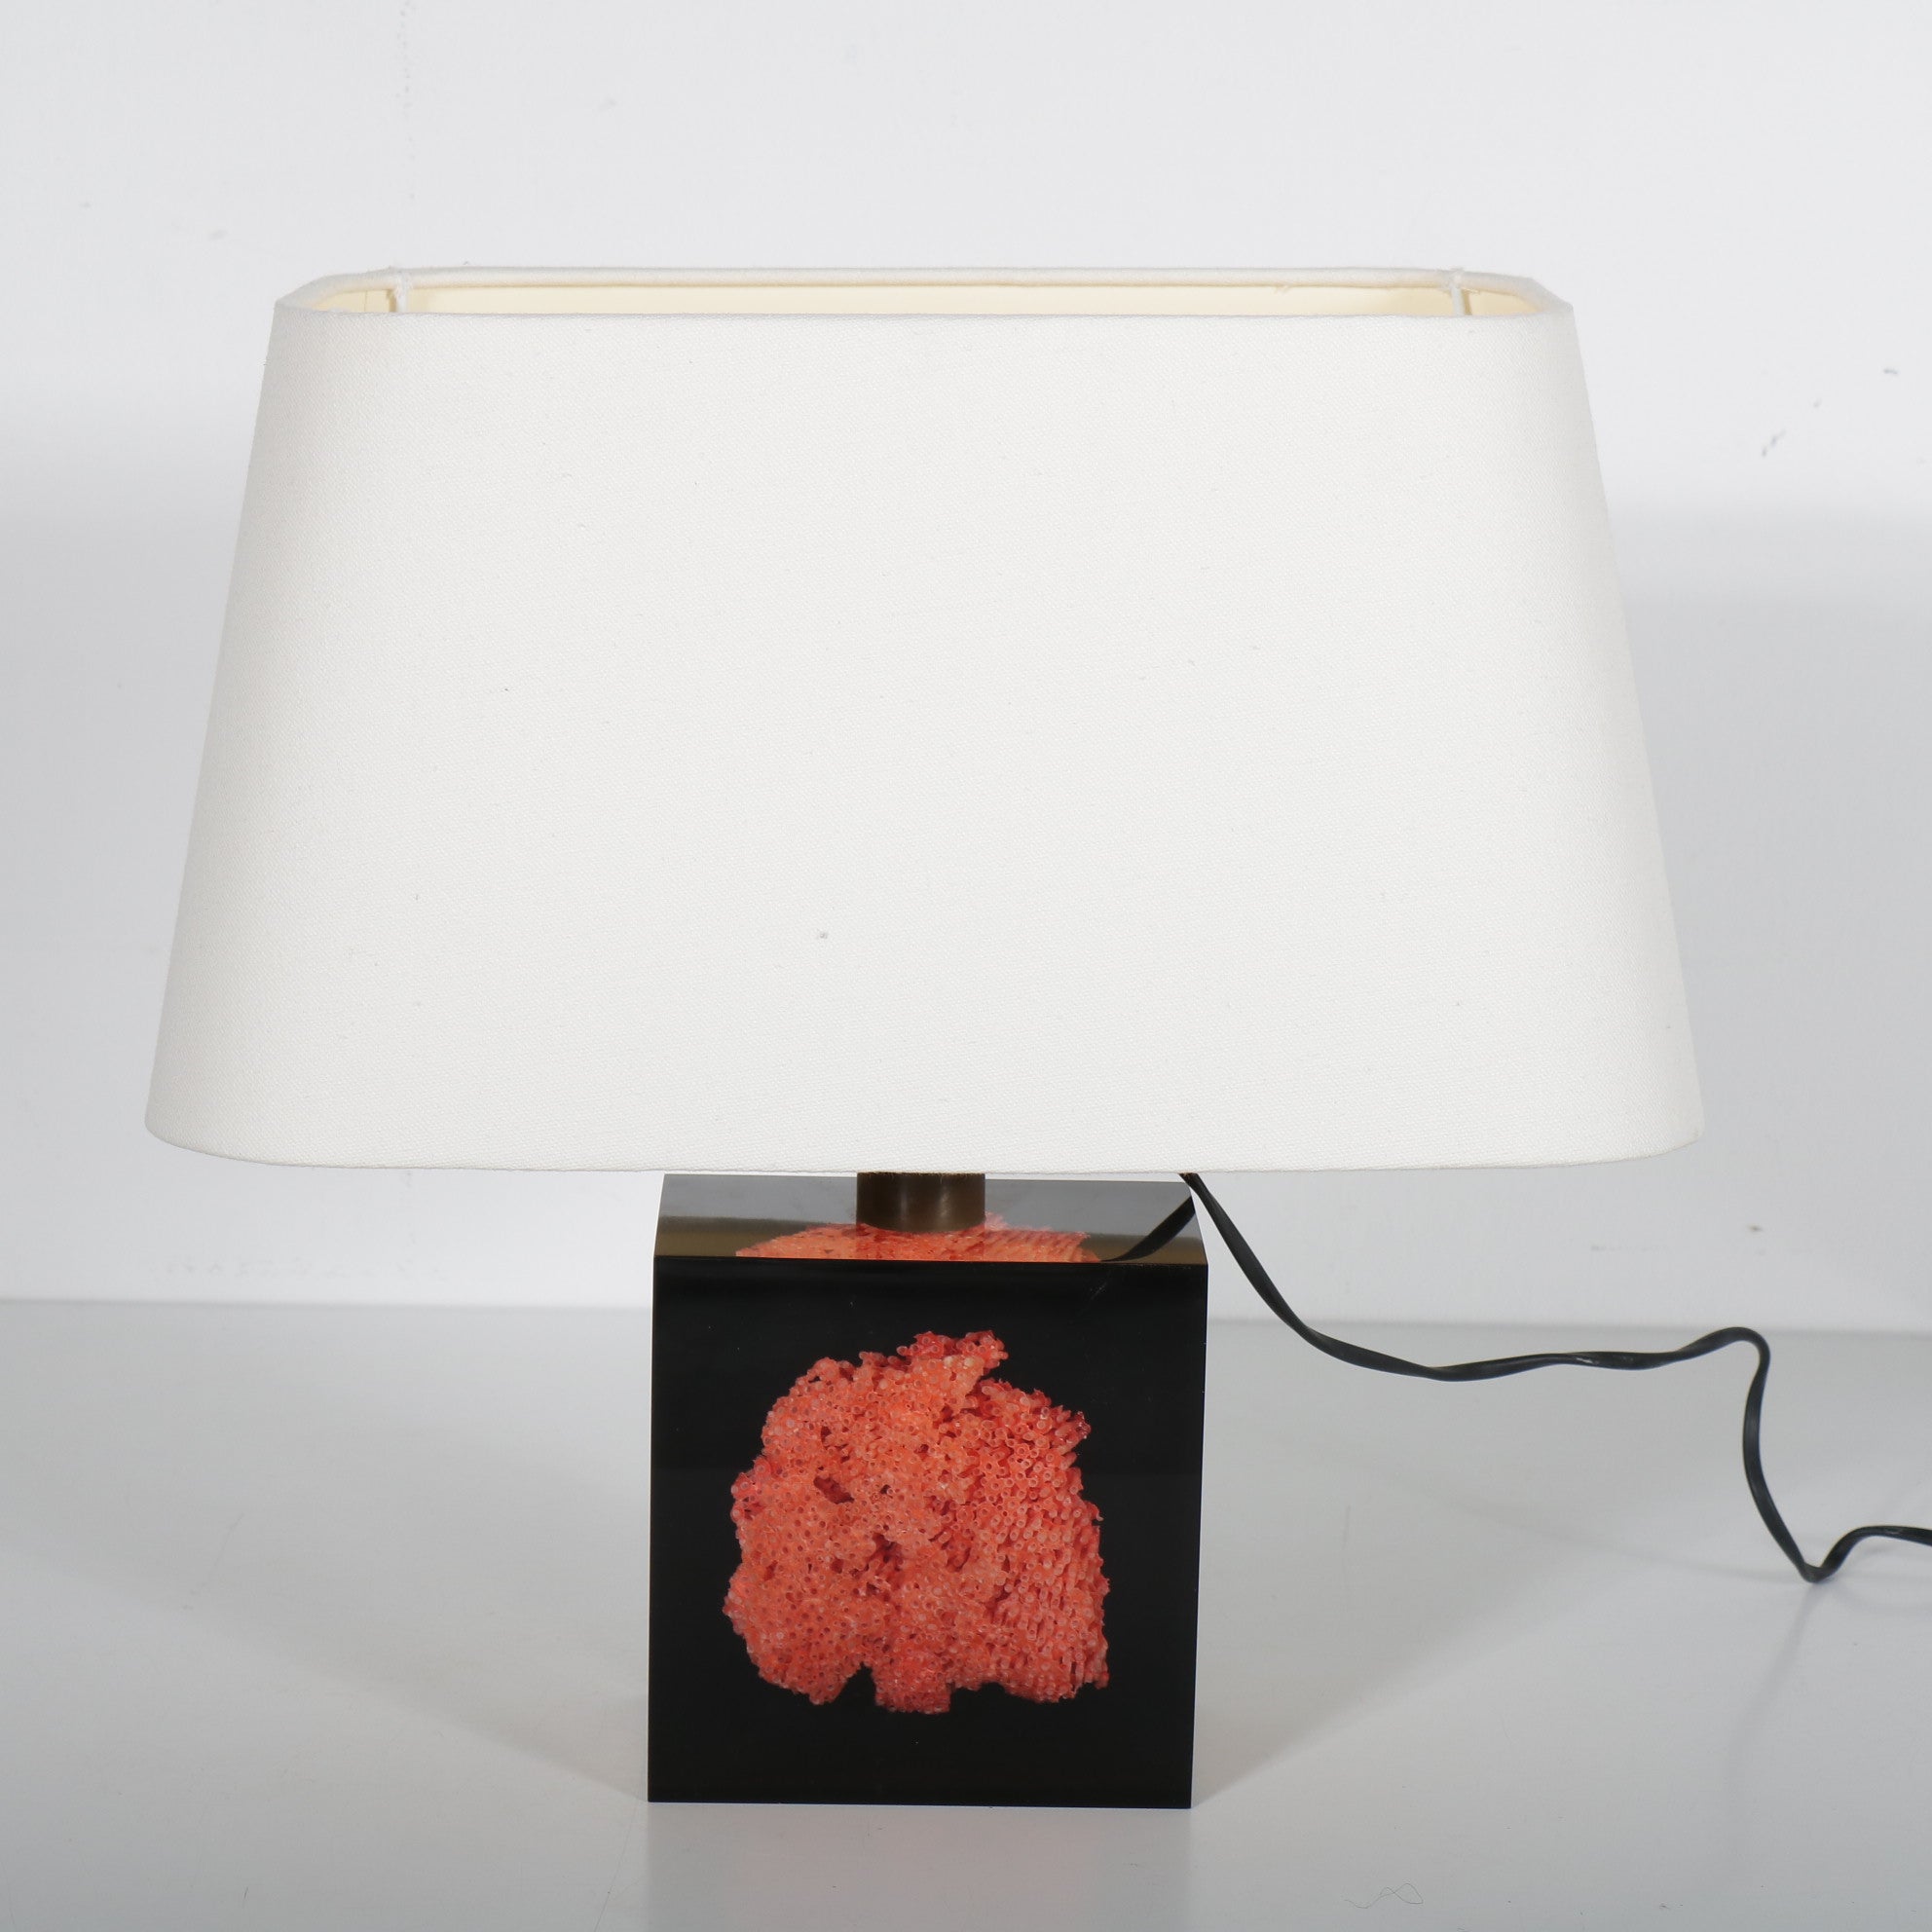 A luxurious table lamp by French designer Pierre Giraudon, manufactured in France around 1970.

The eye-catching feature of this piece is that it has a square clear resin base which holds a red / orange piece of coral. The back of the cube is made